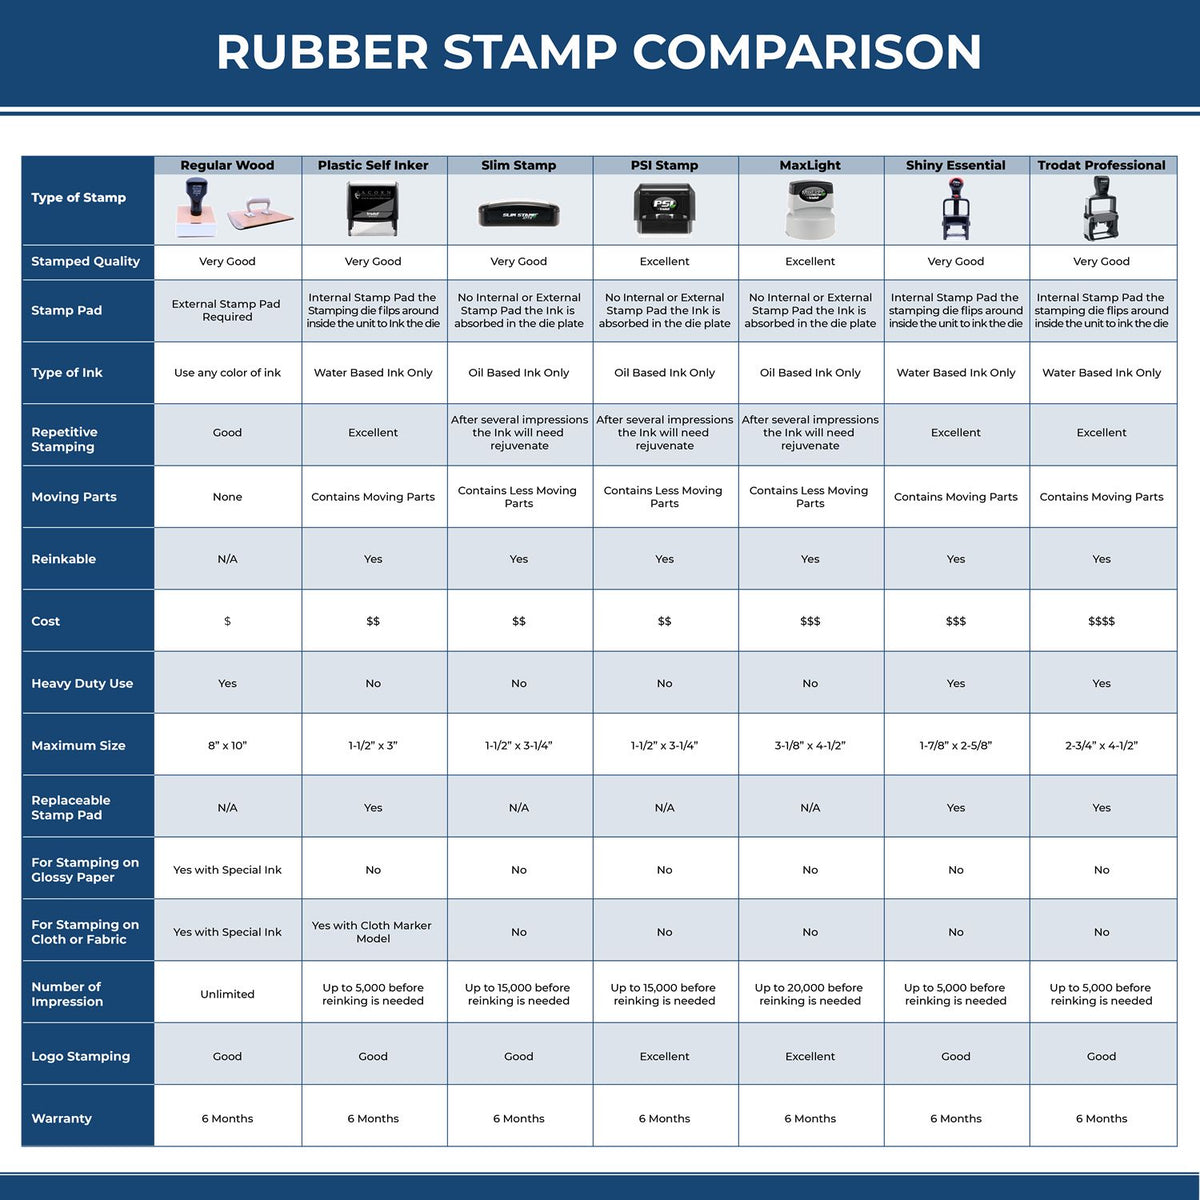 Large Evidence Rubber Stamp 4612R Rubber Stamp Comparison